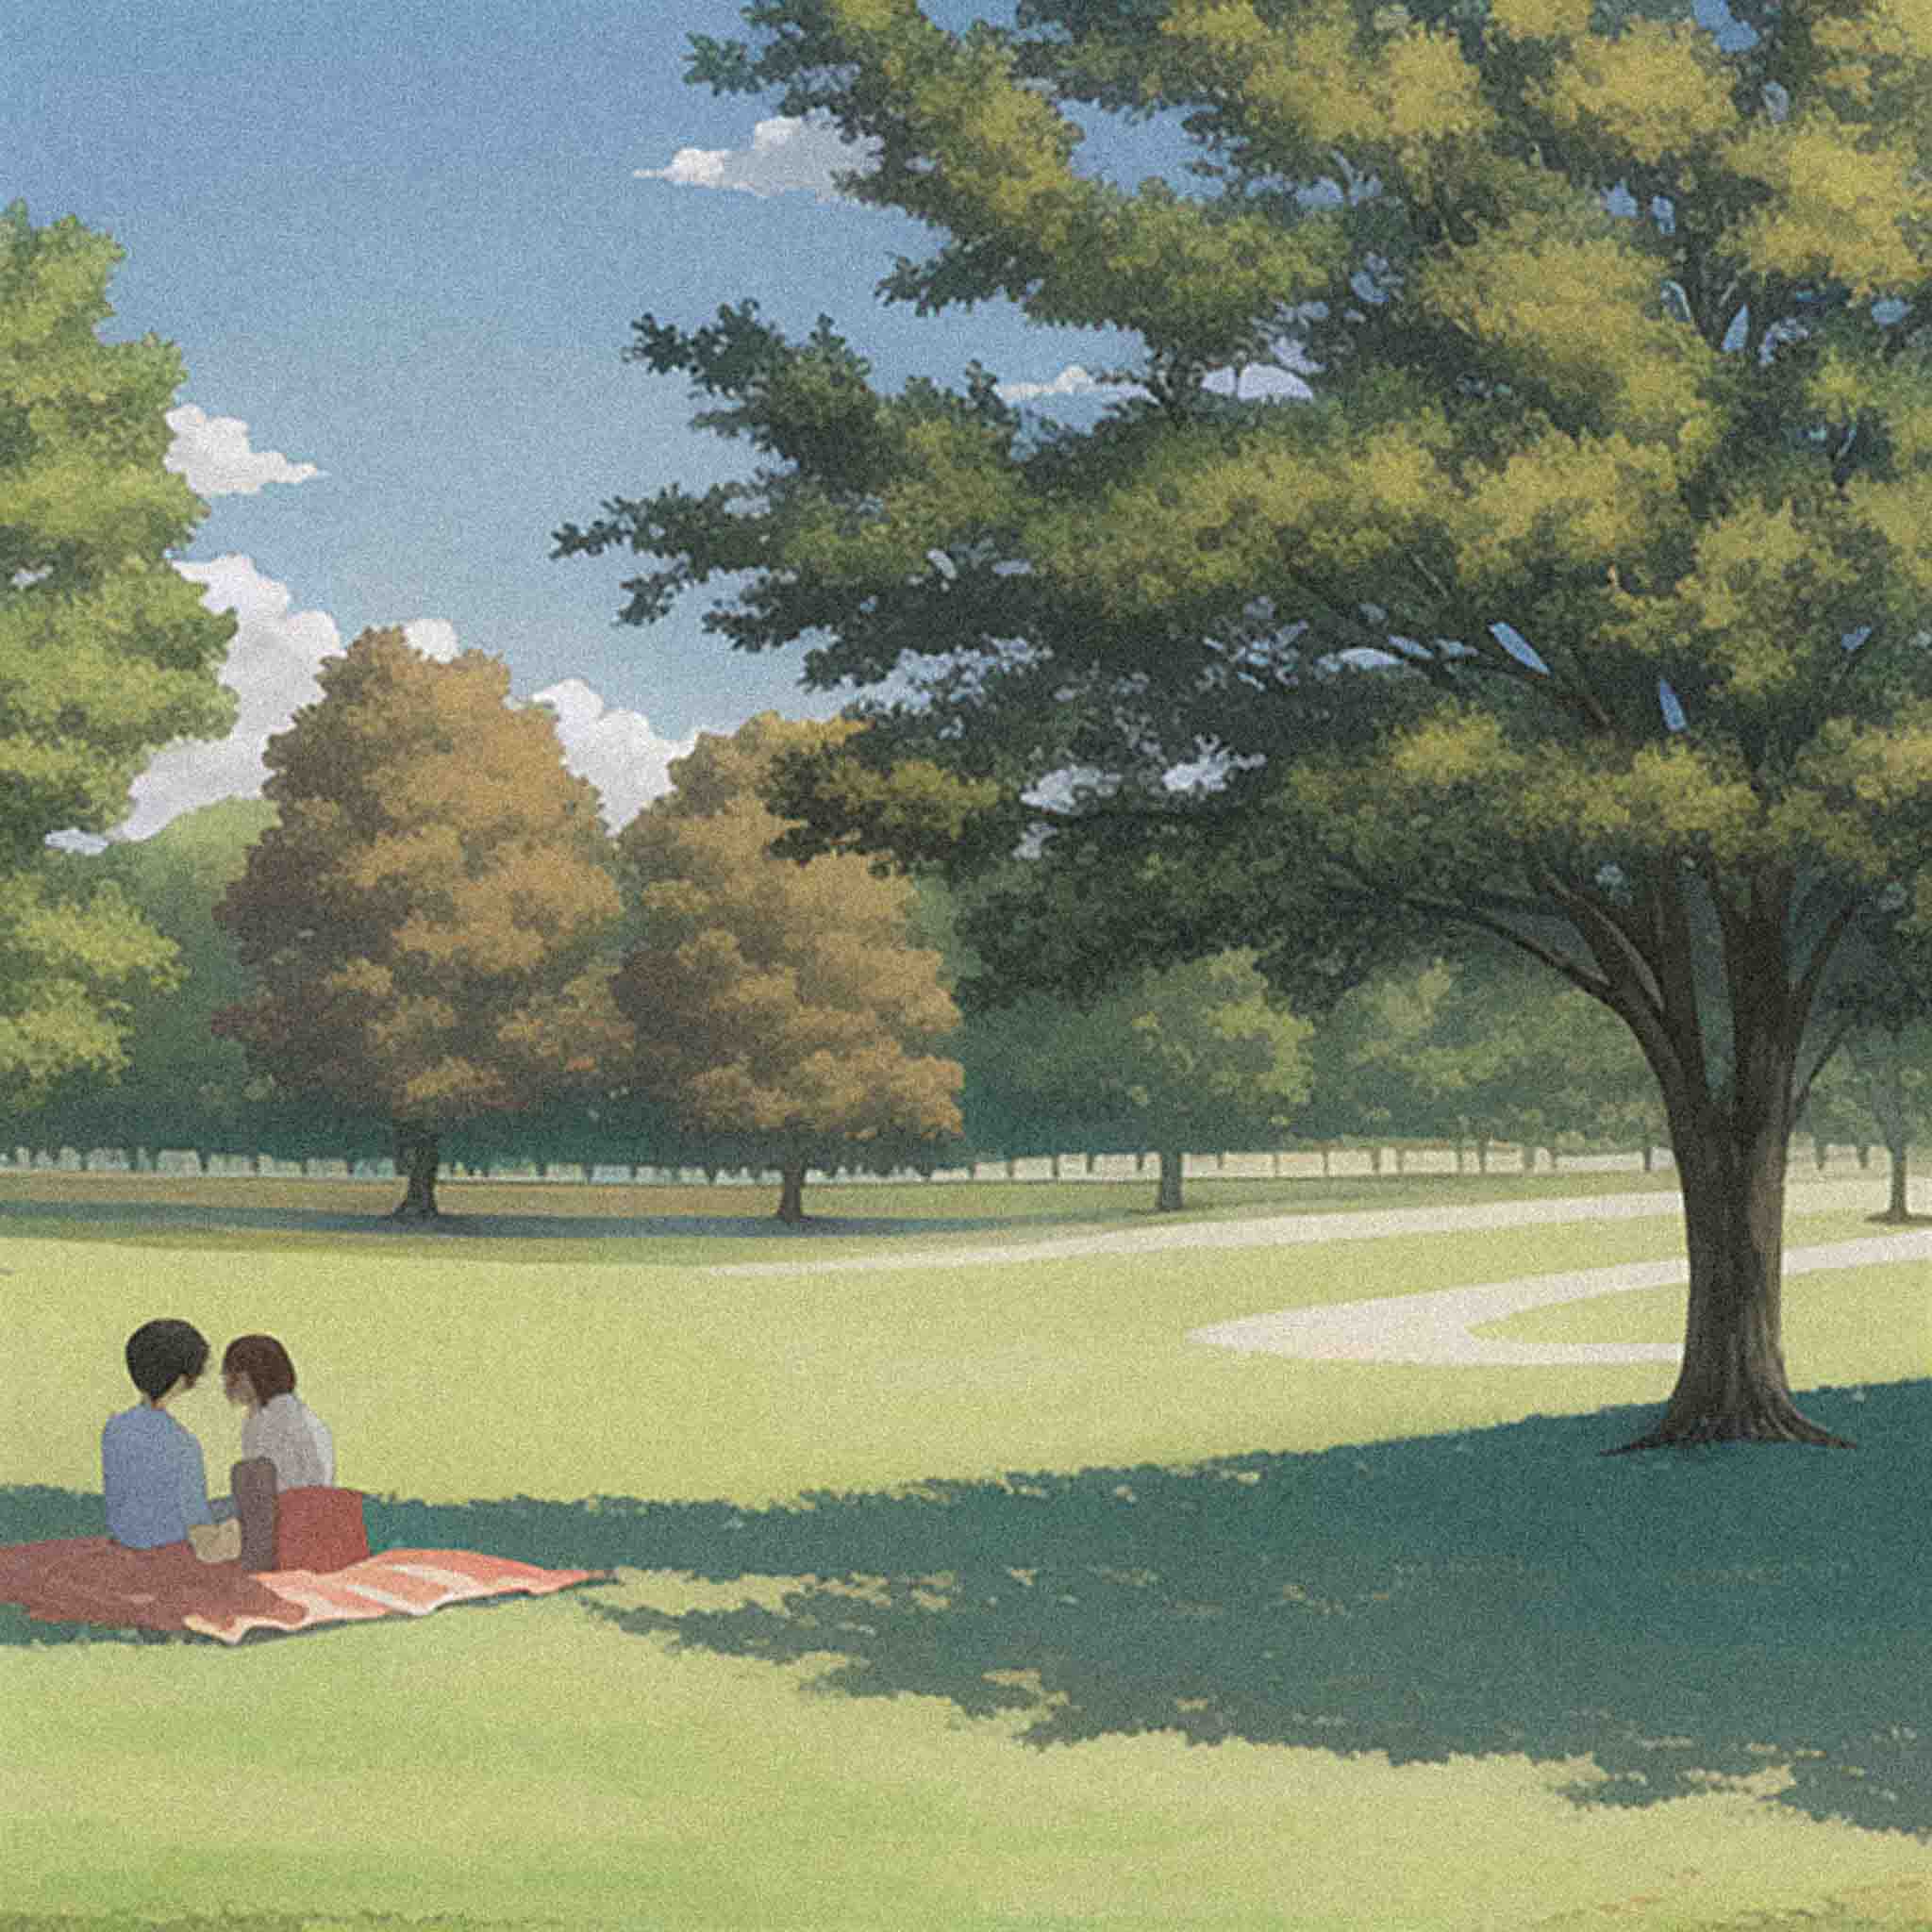 A Picnic in the Park by Tetsu.jpg